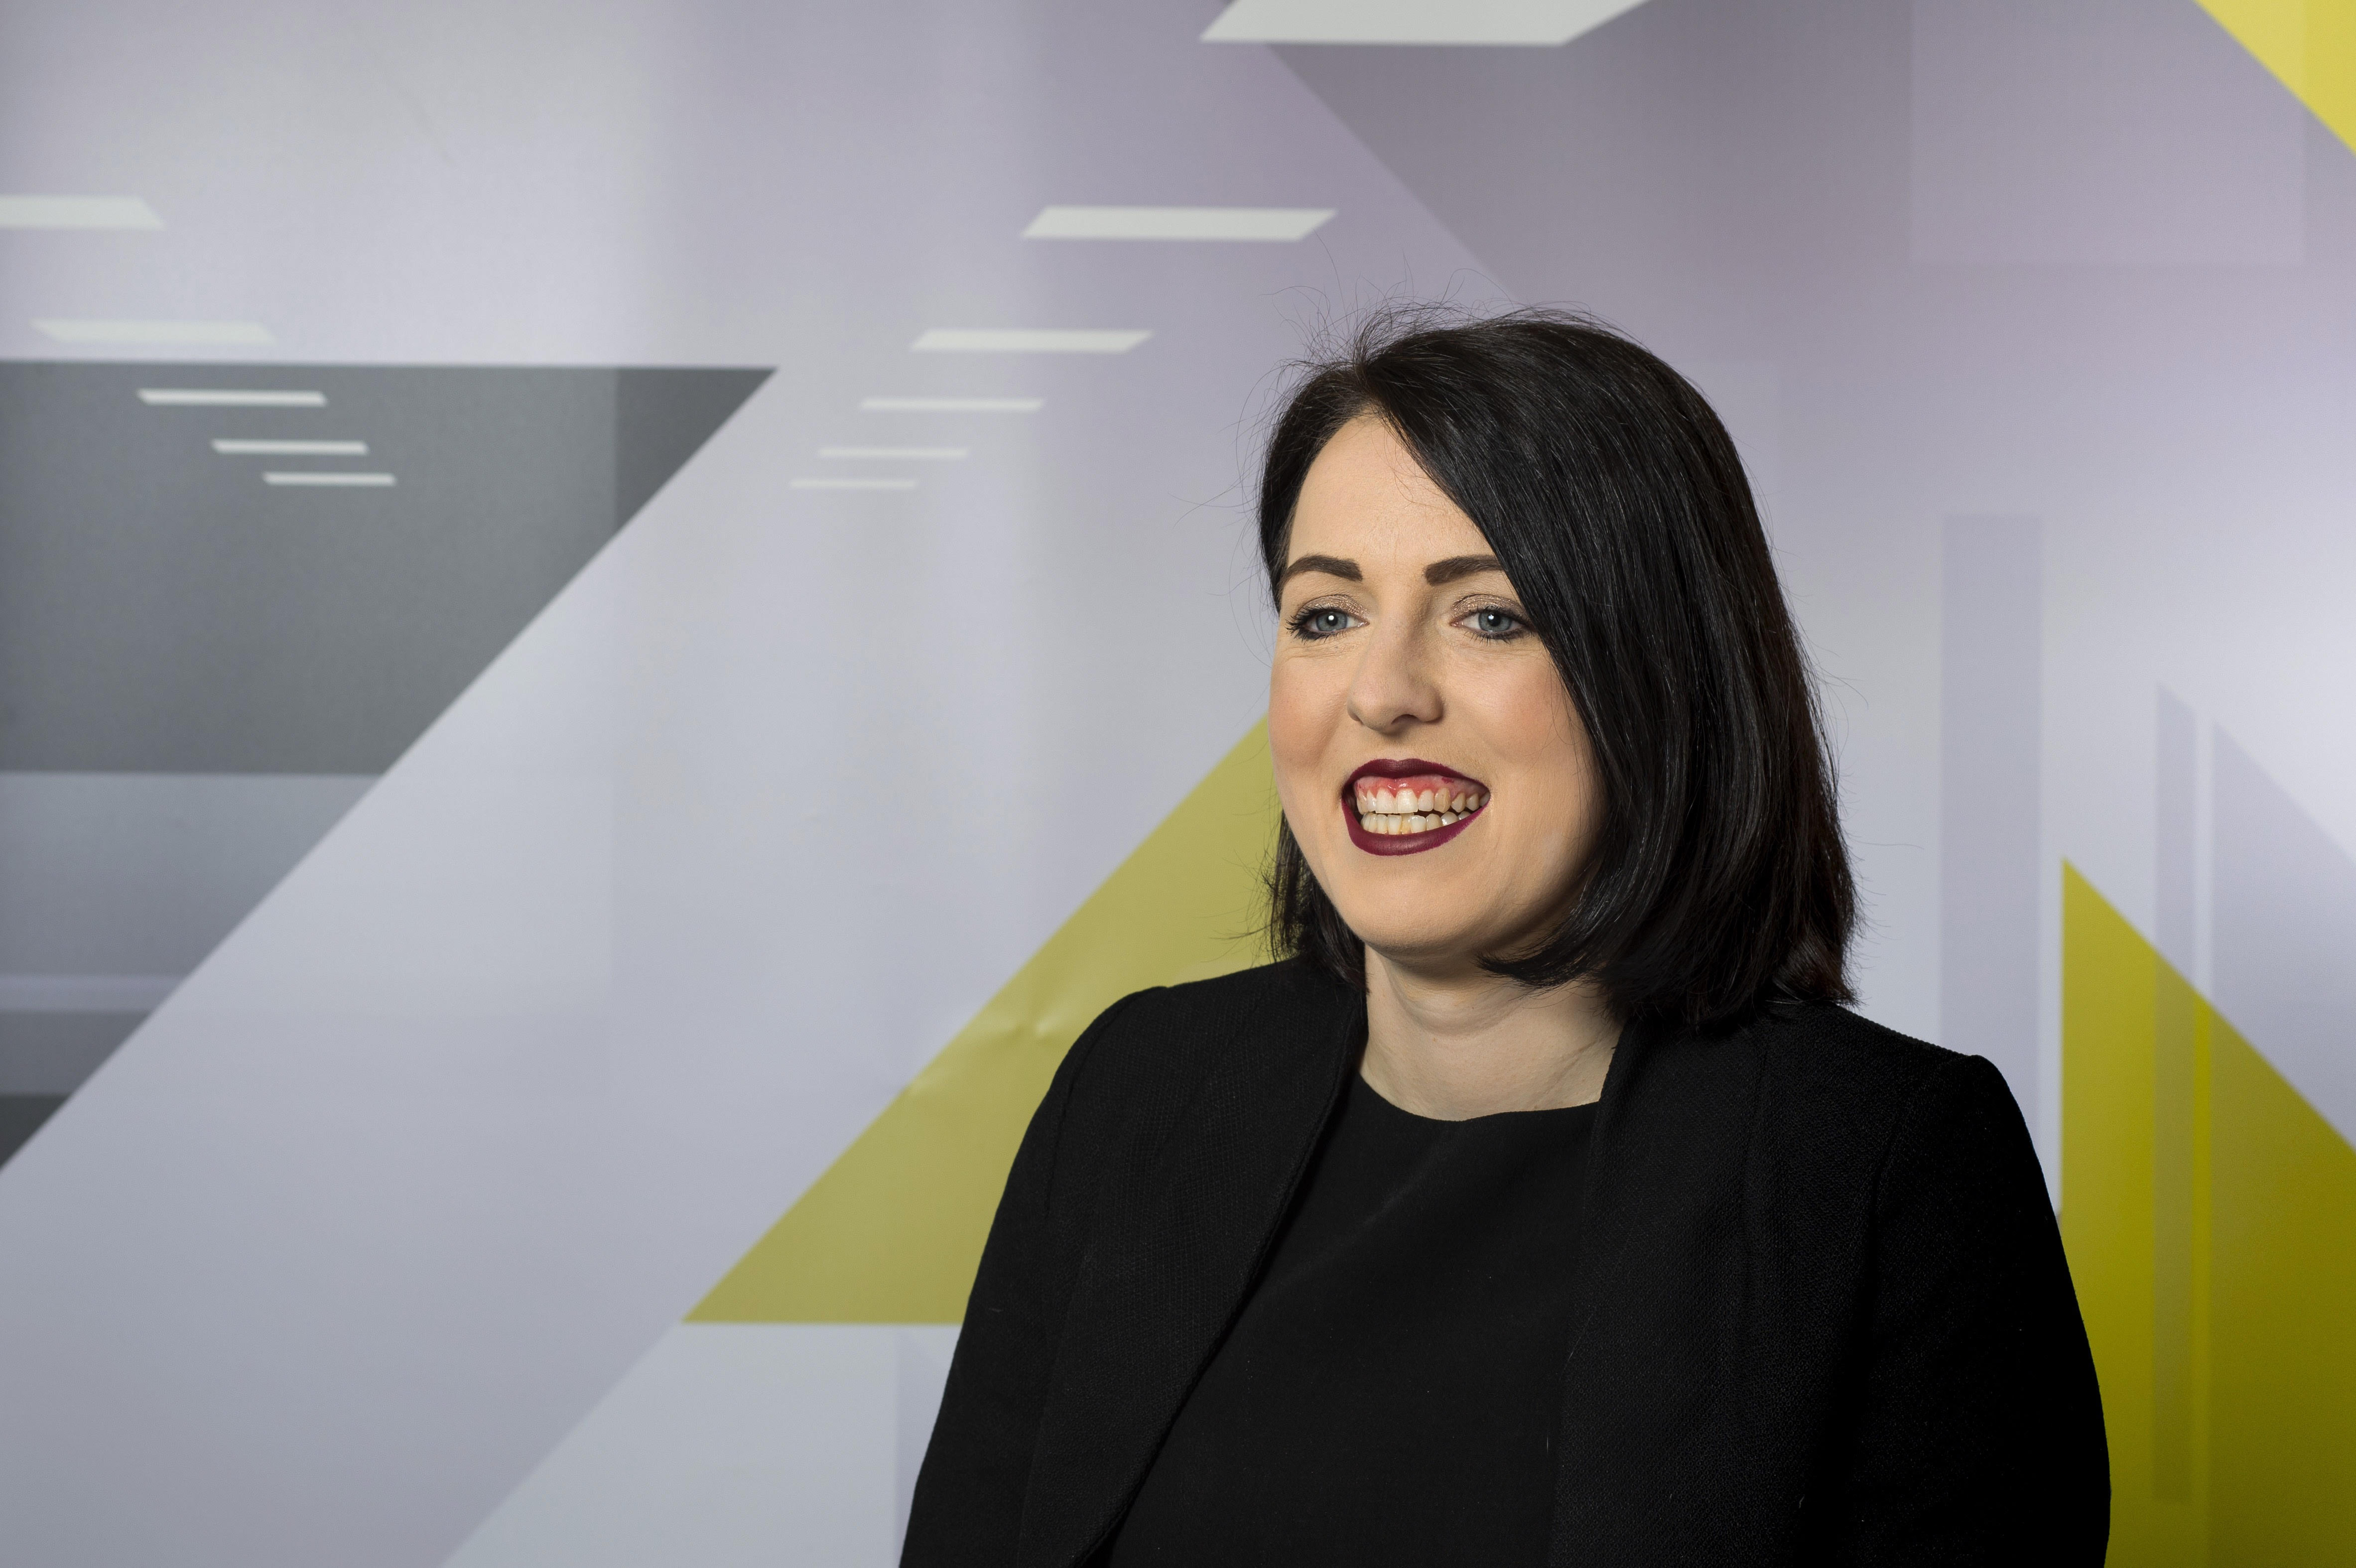 Allie McGowan: The impact of COVID-19 on UK FinTech sector